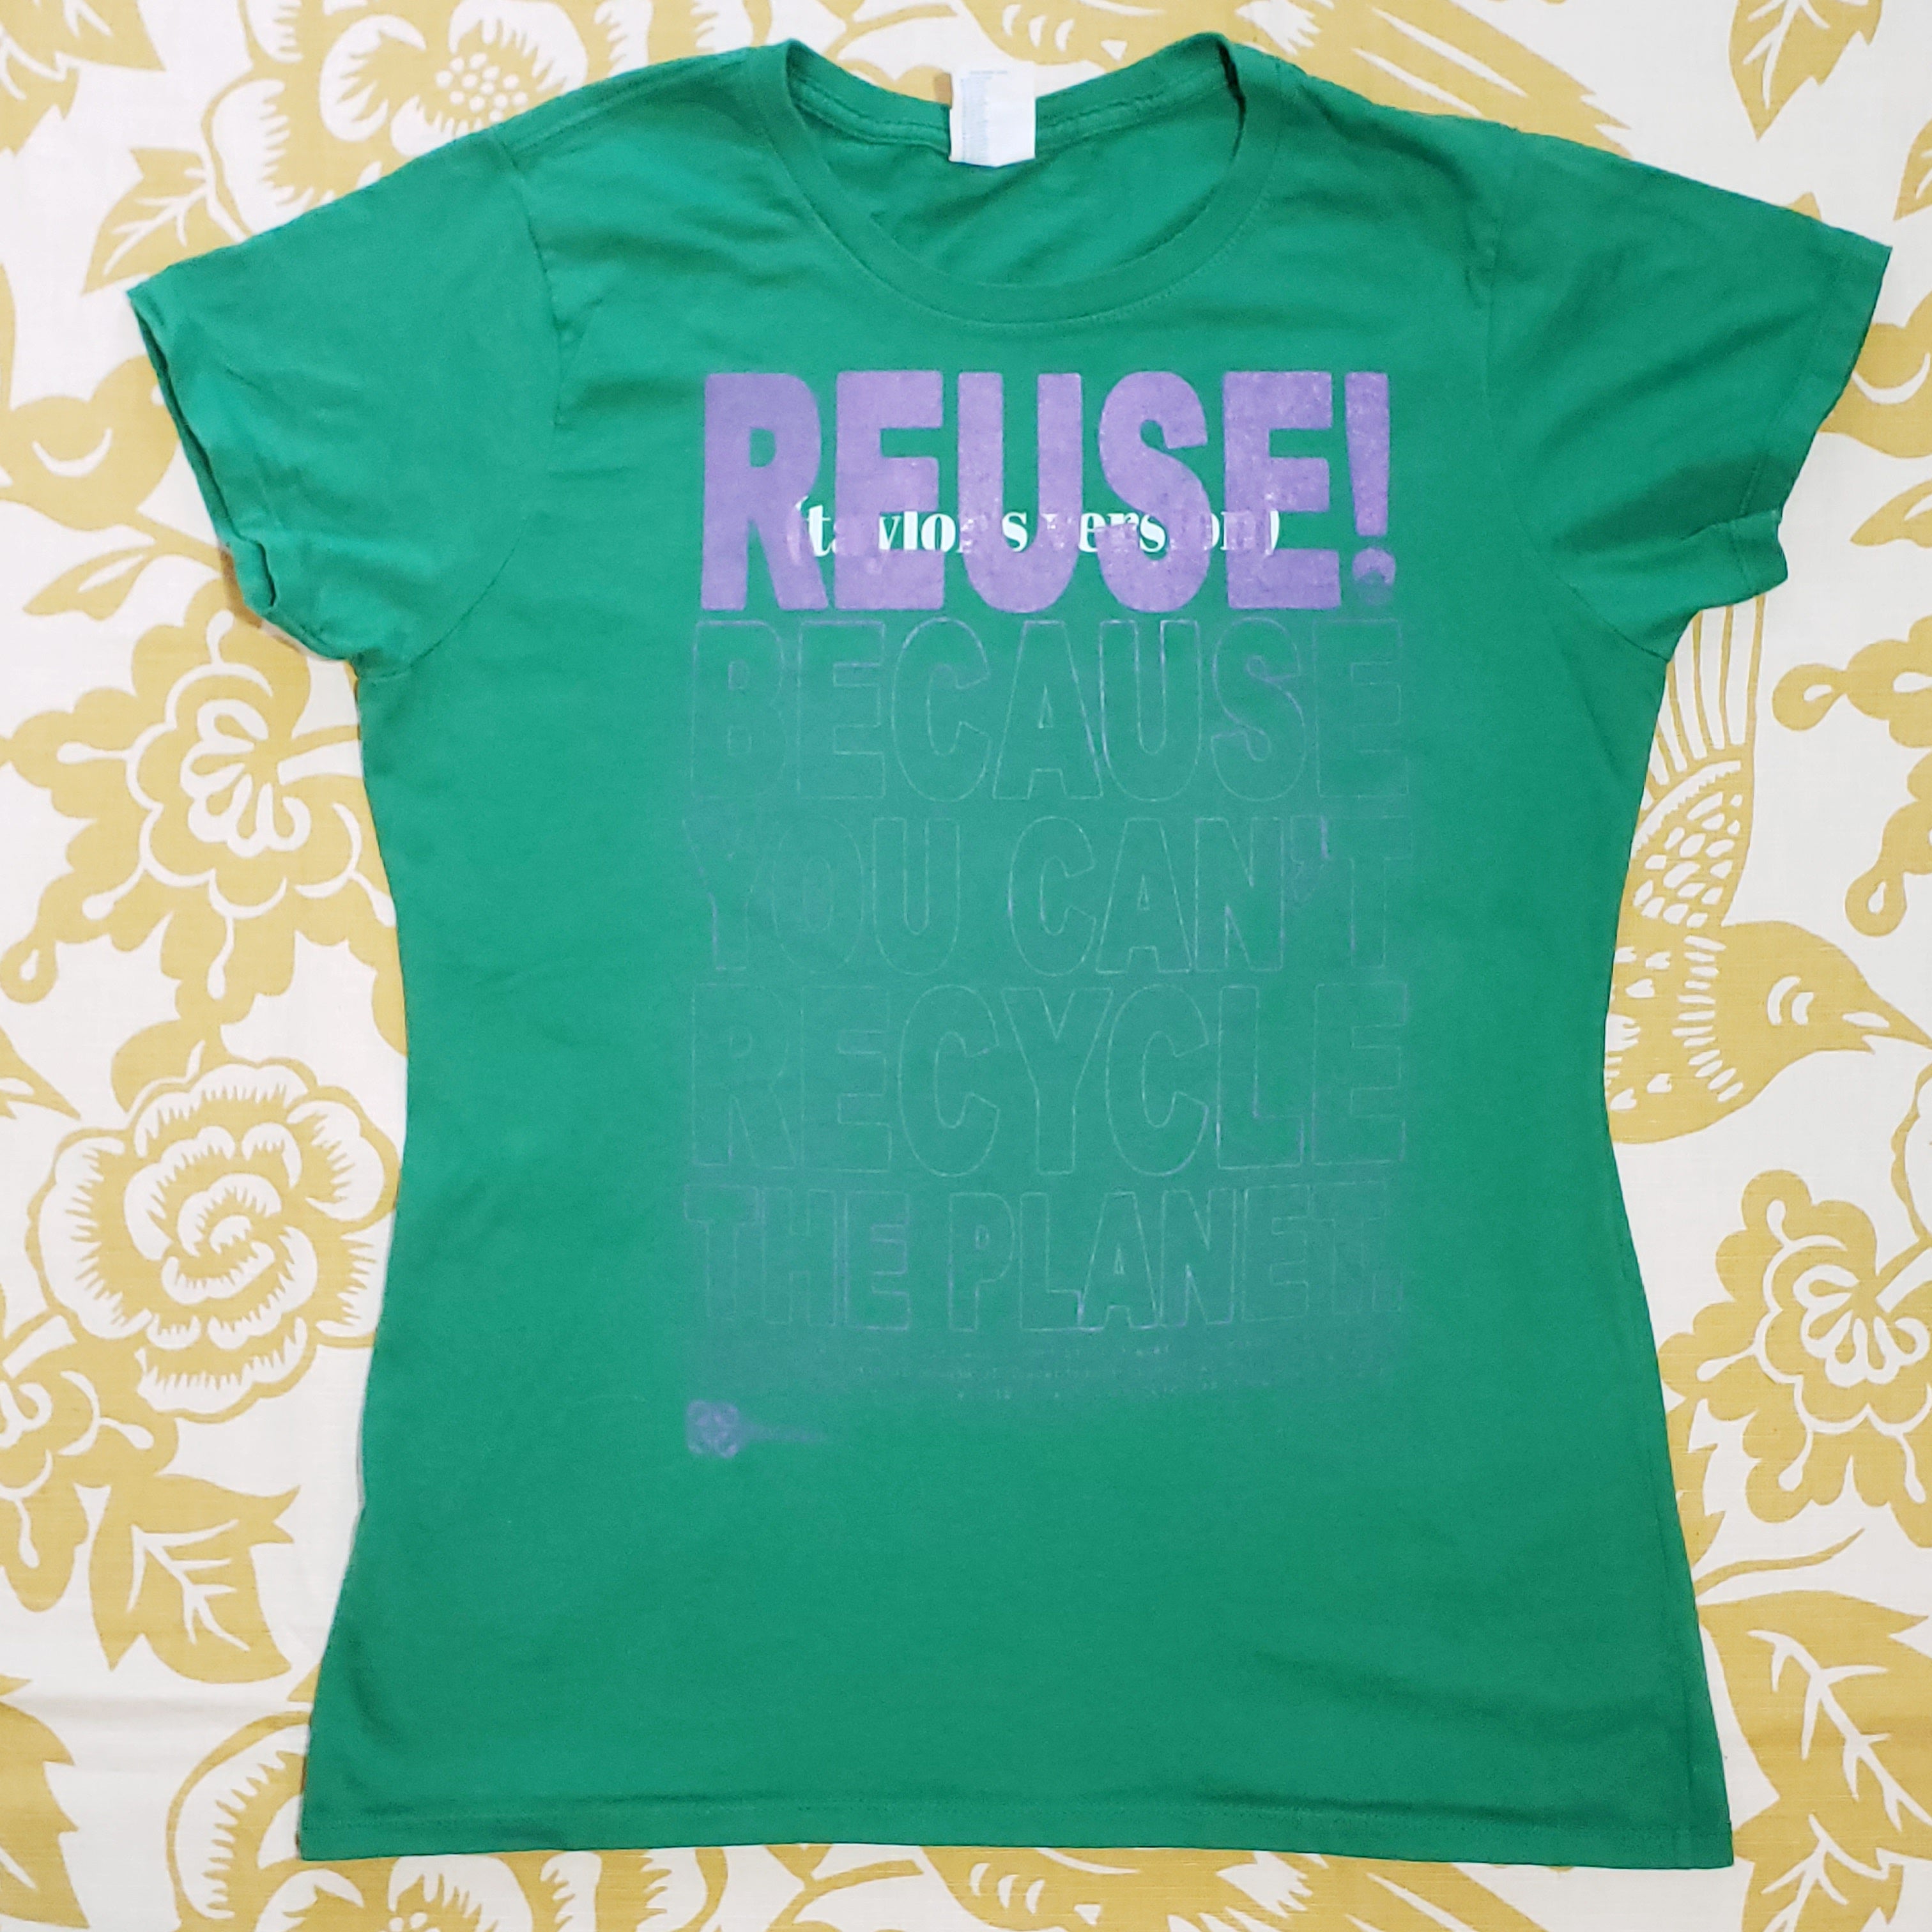 One of a Kind (Women's M) REUSE! Taylor Swift's Version T-Shirt